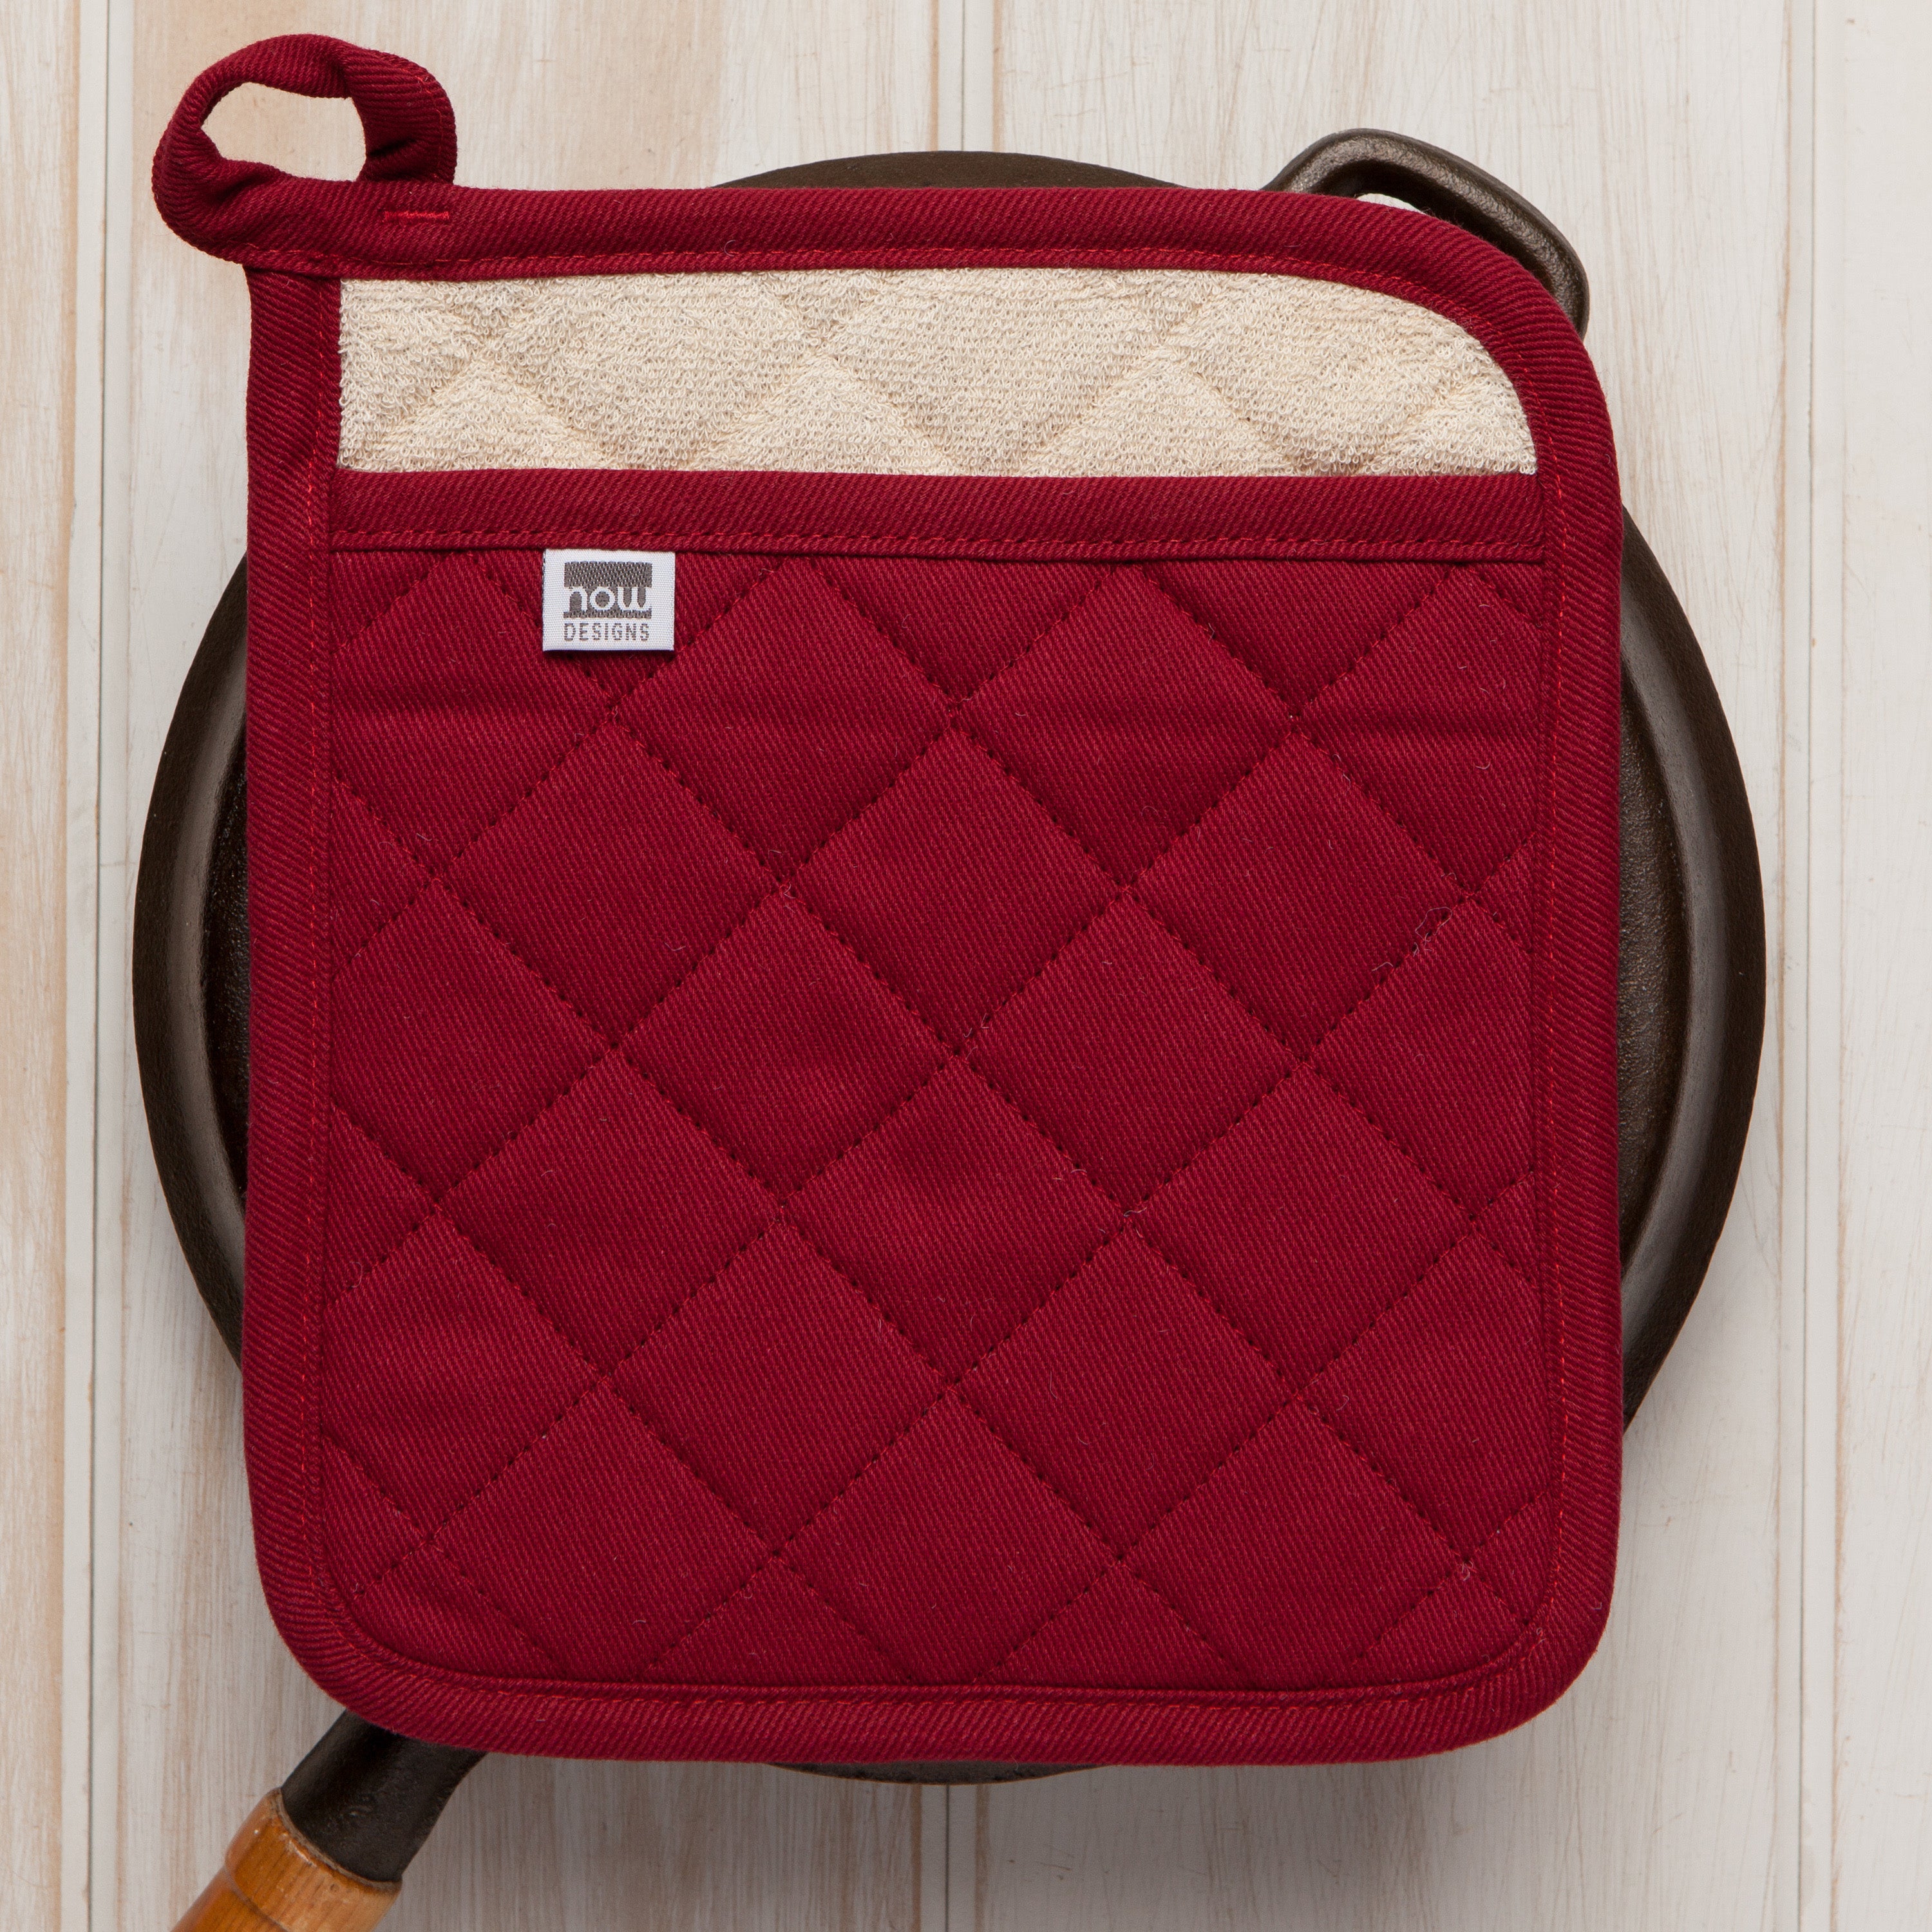 Carmin Red - Superior Potholders by Now Designs®